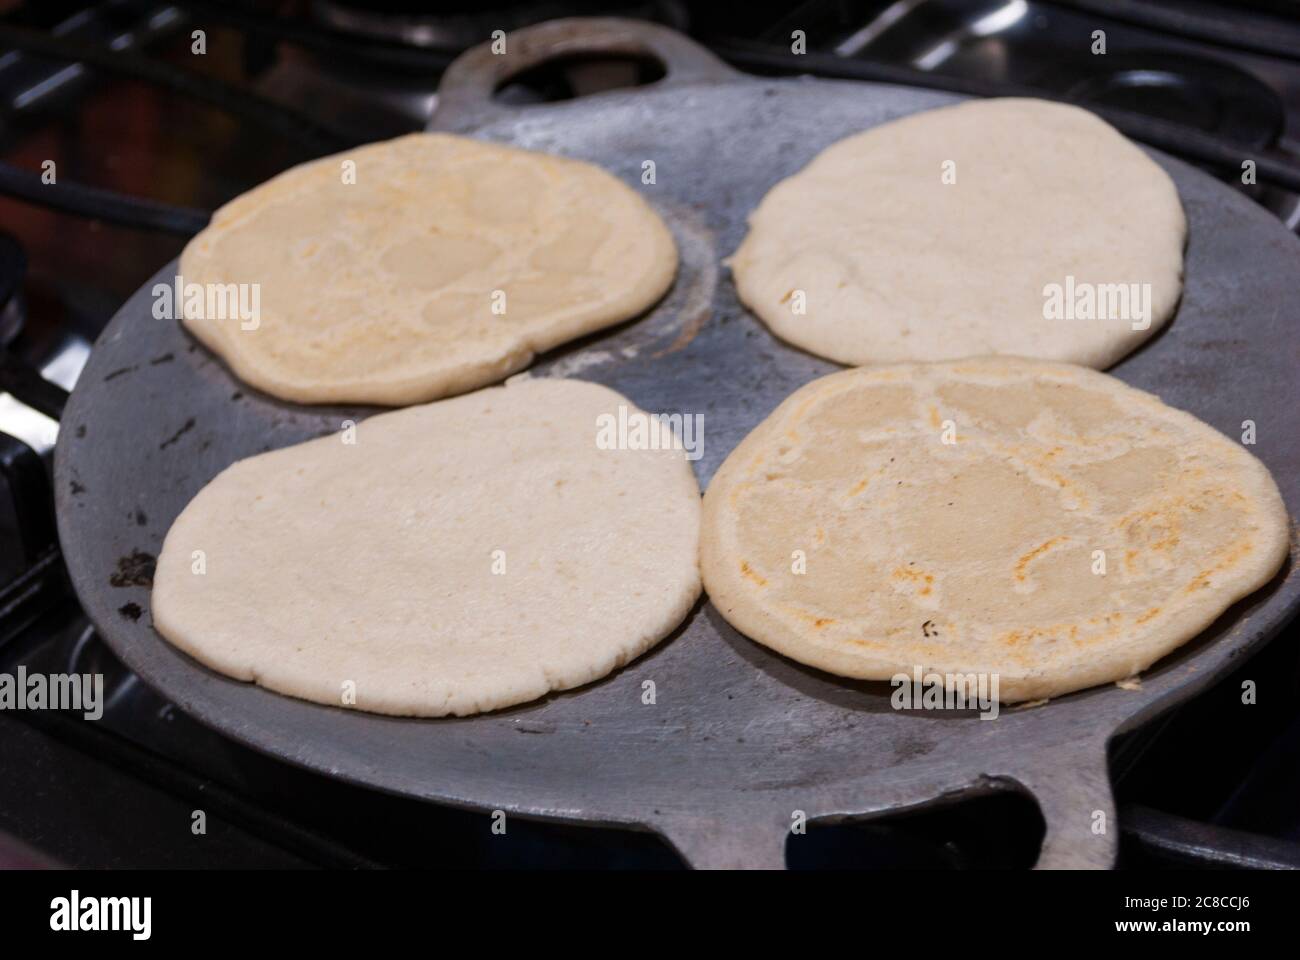 https://c8.alamy.com/comp/2C8CCJ6/nutritious-handmade-corn-tortilla-cooked-on-a-metal-griddle-on-a-gas-stove-in-a-guatemalan-home-2C8CCJ6.jpg